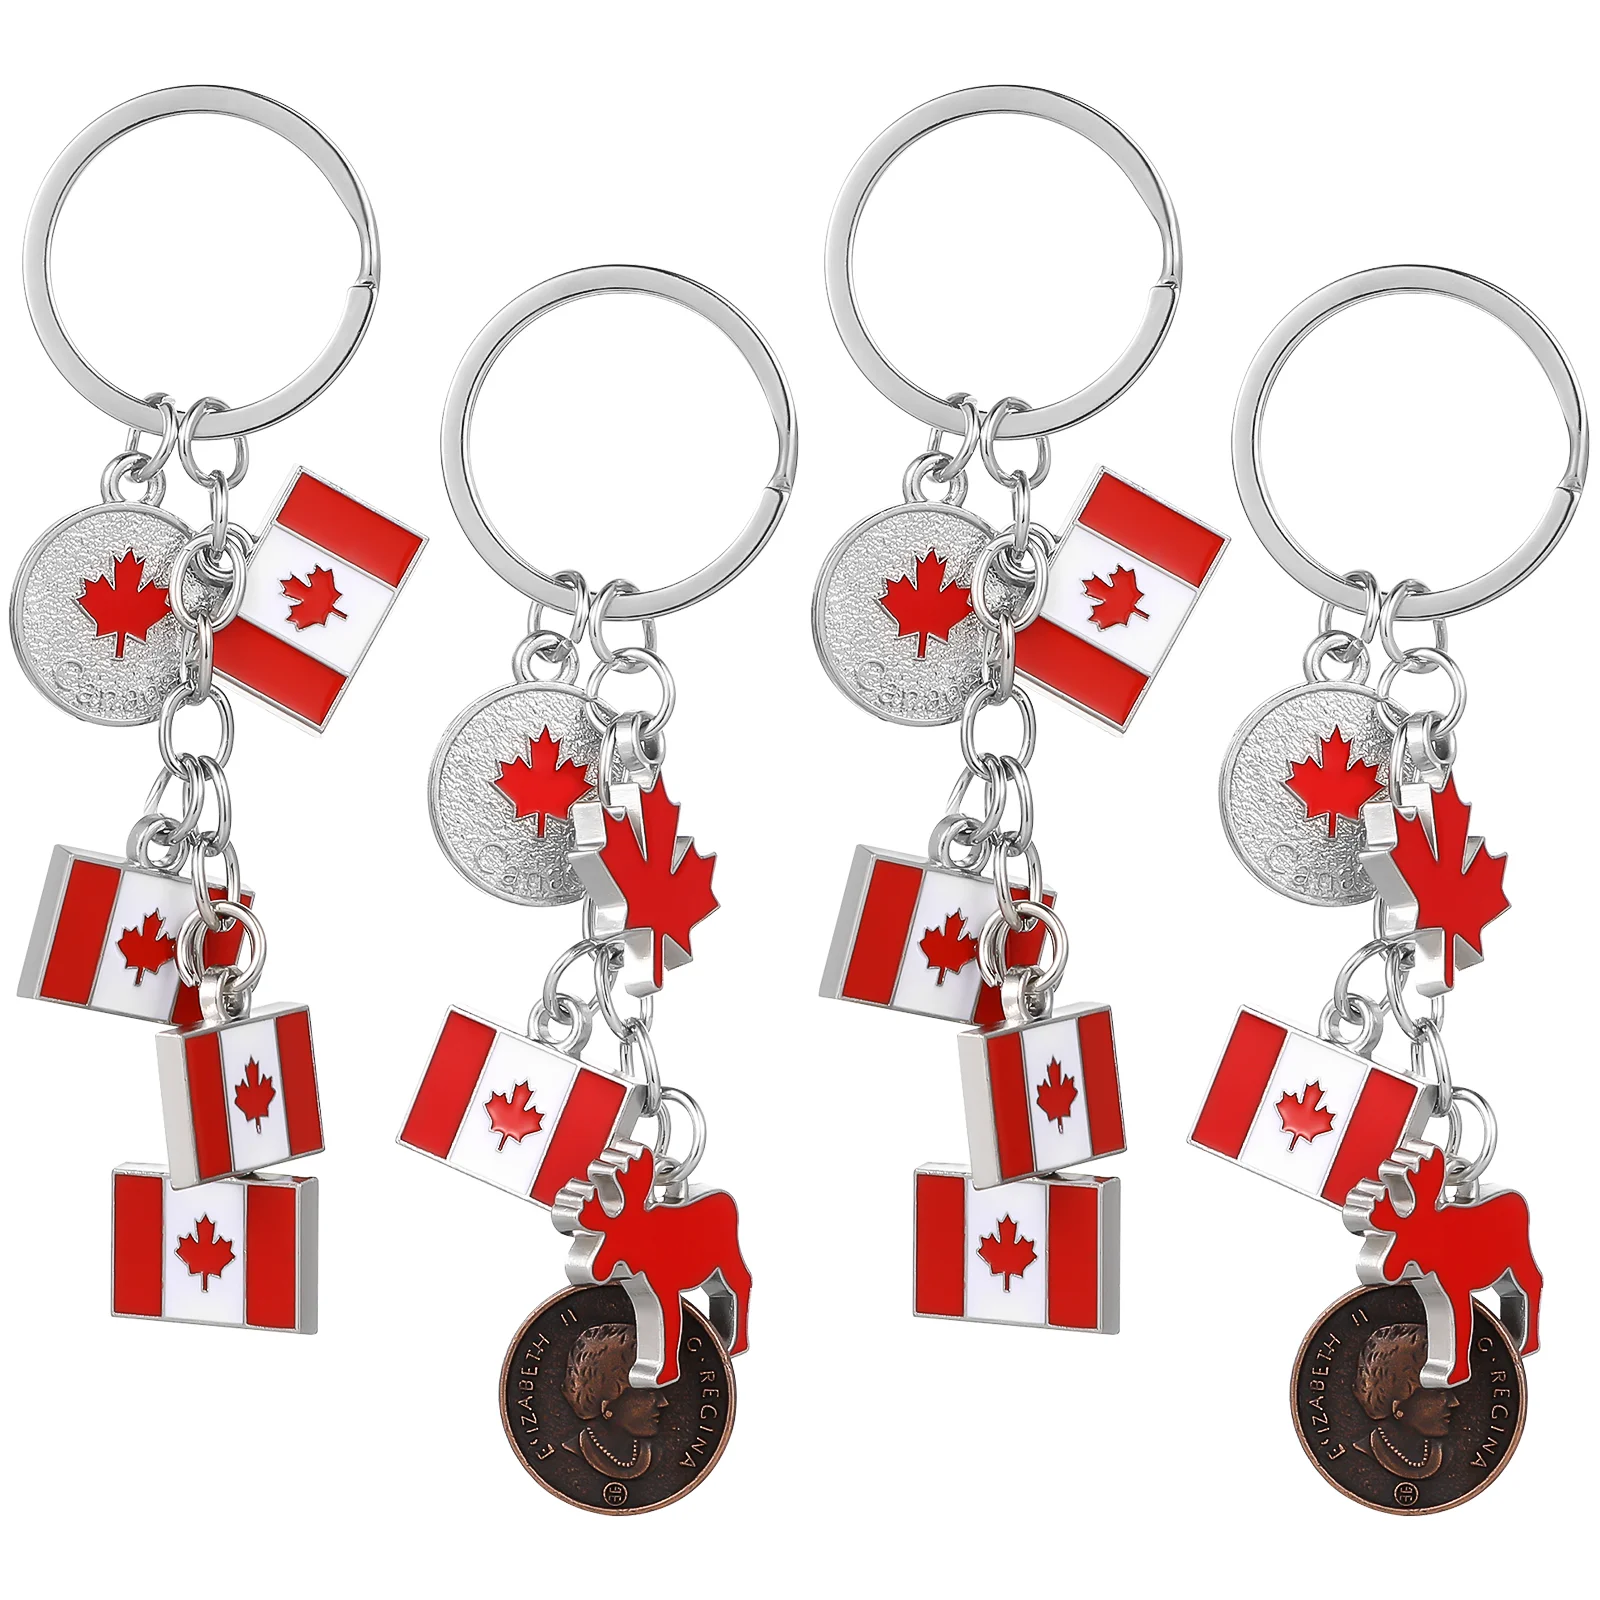 

Canadian Metal Key Decorative Hanging Keyrings Creative Car Trims Gift For Friends Family Colleague#j